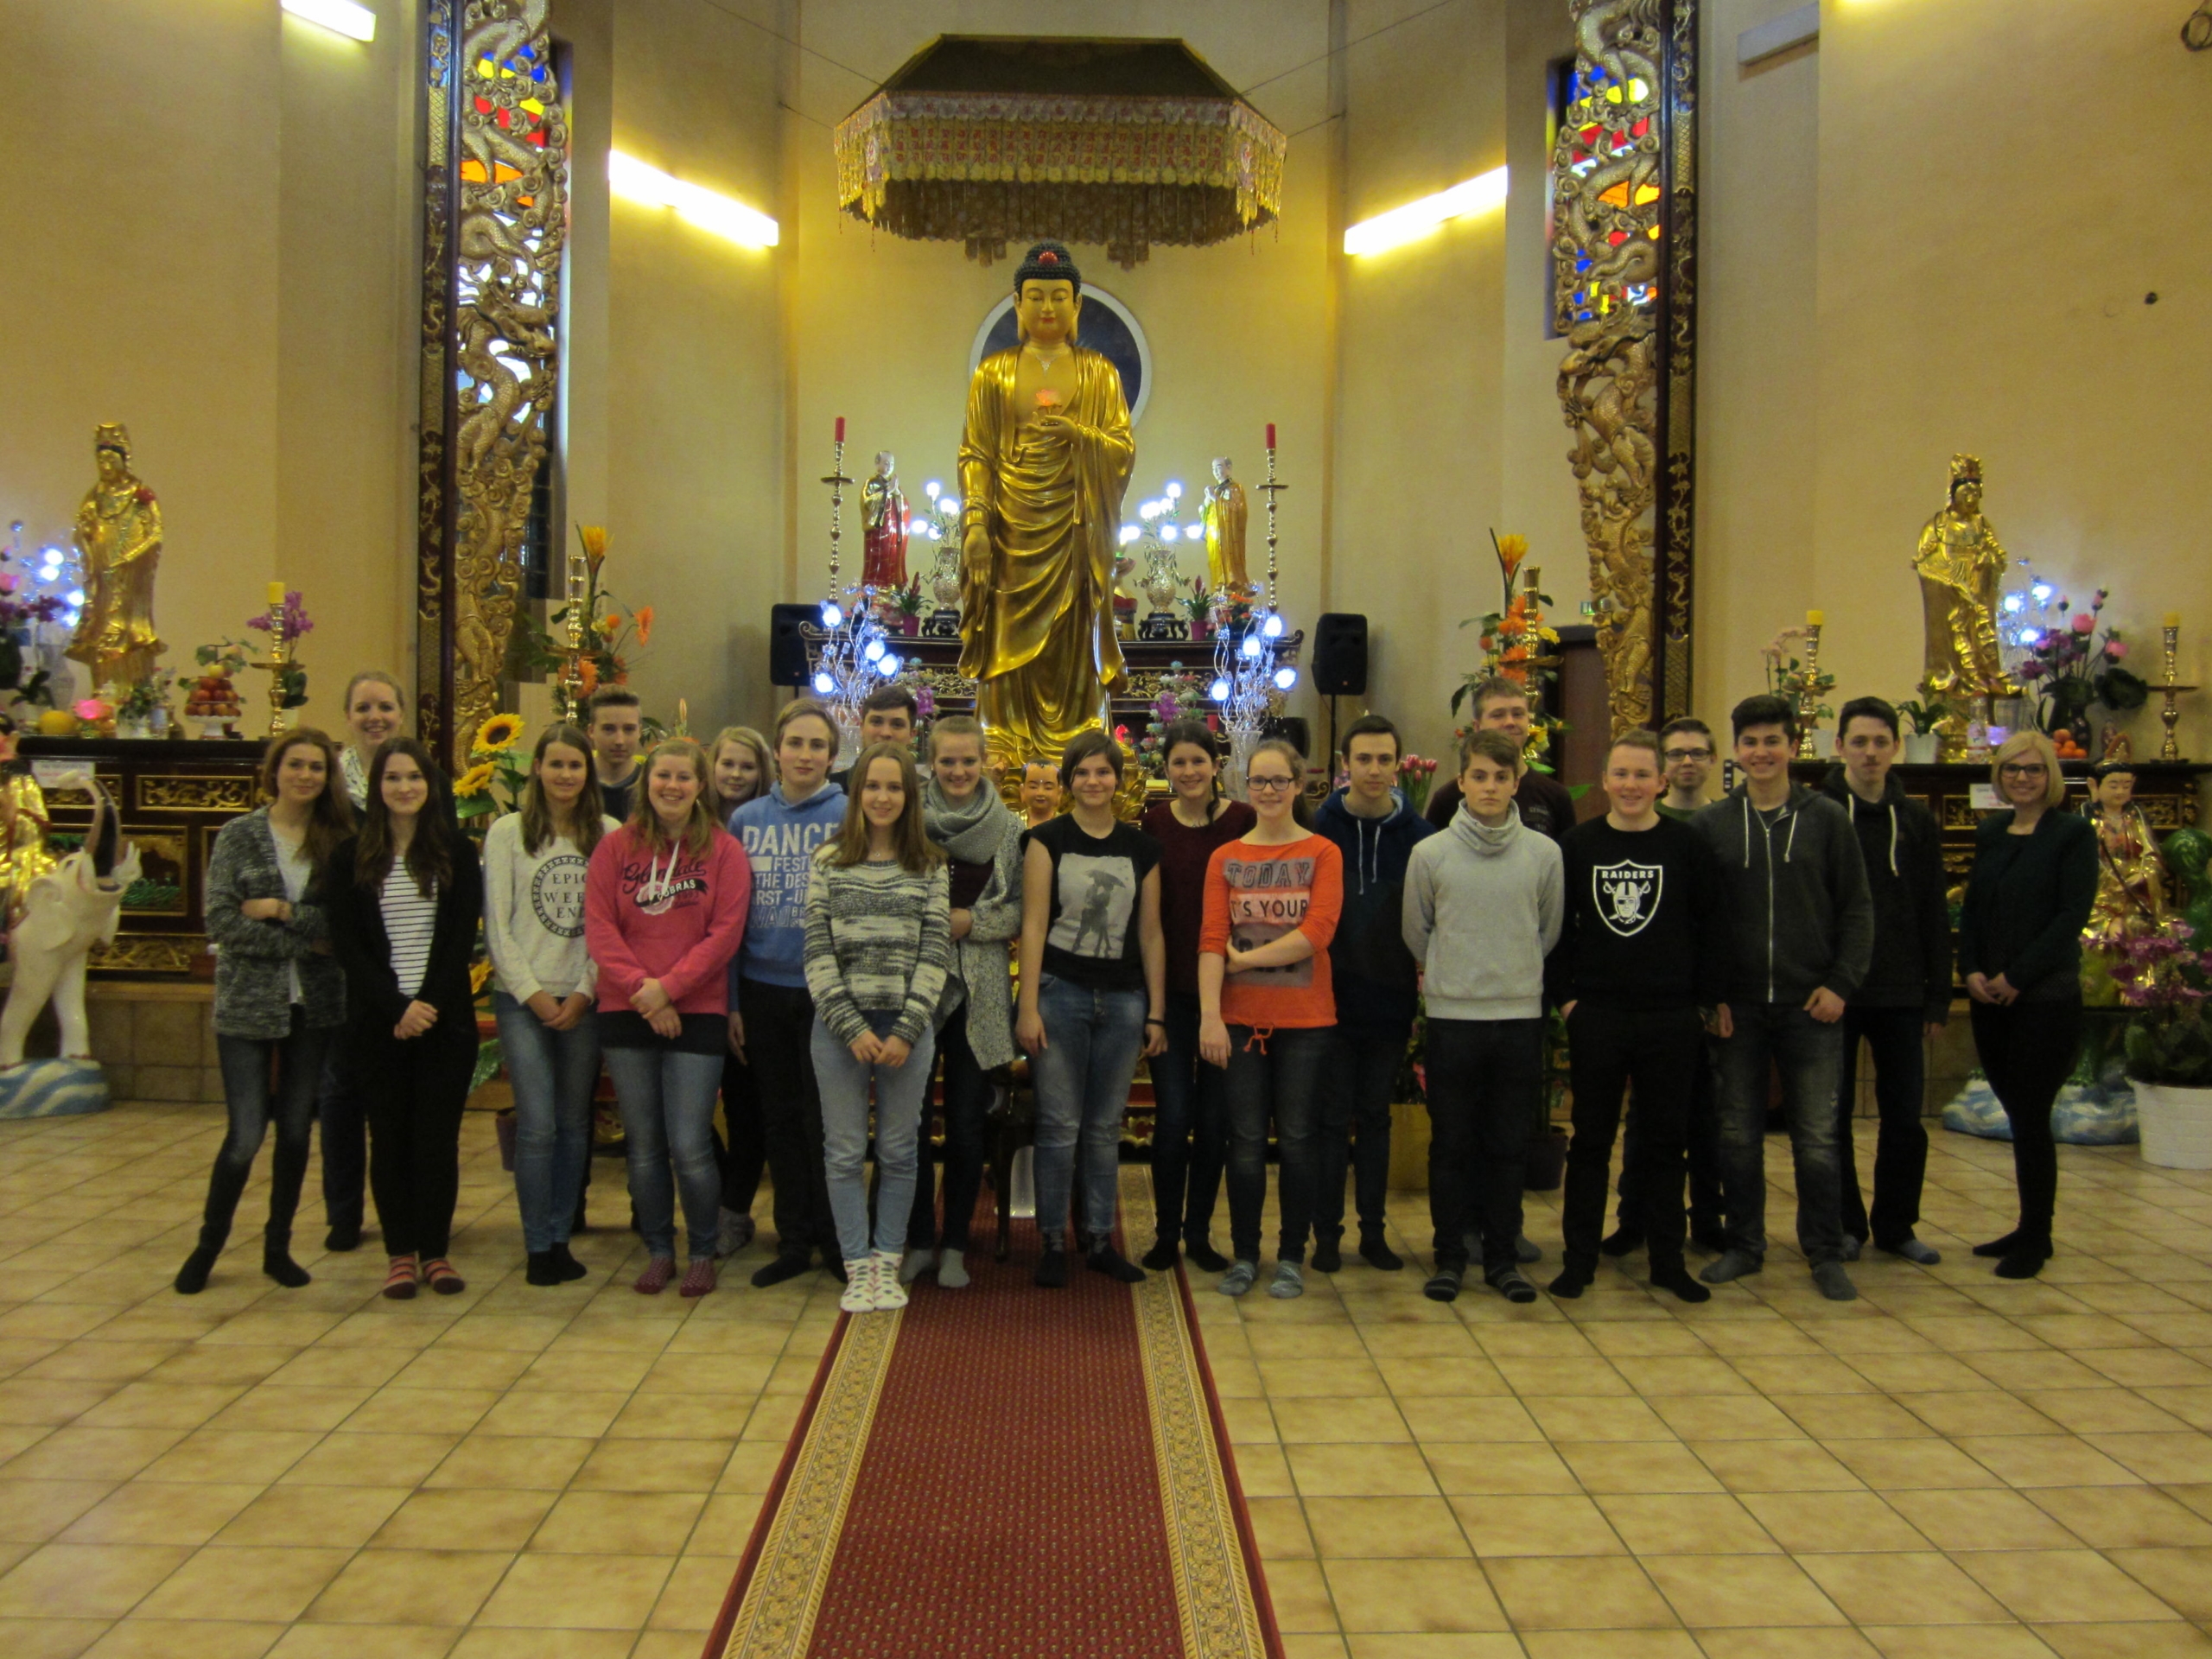 You are currently viewing Besuch des buddhistischen Tempels in Hannover